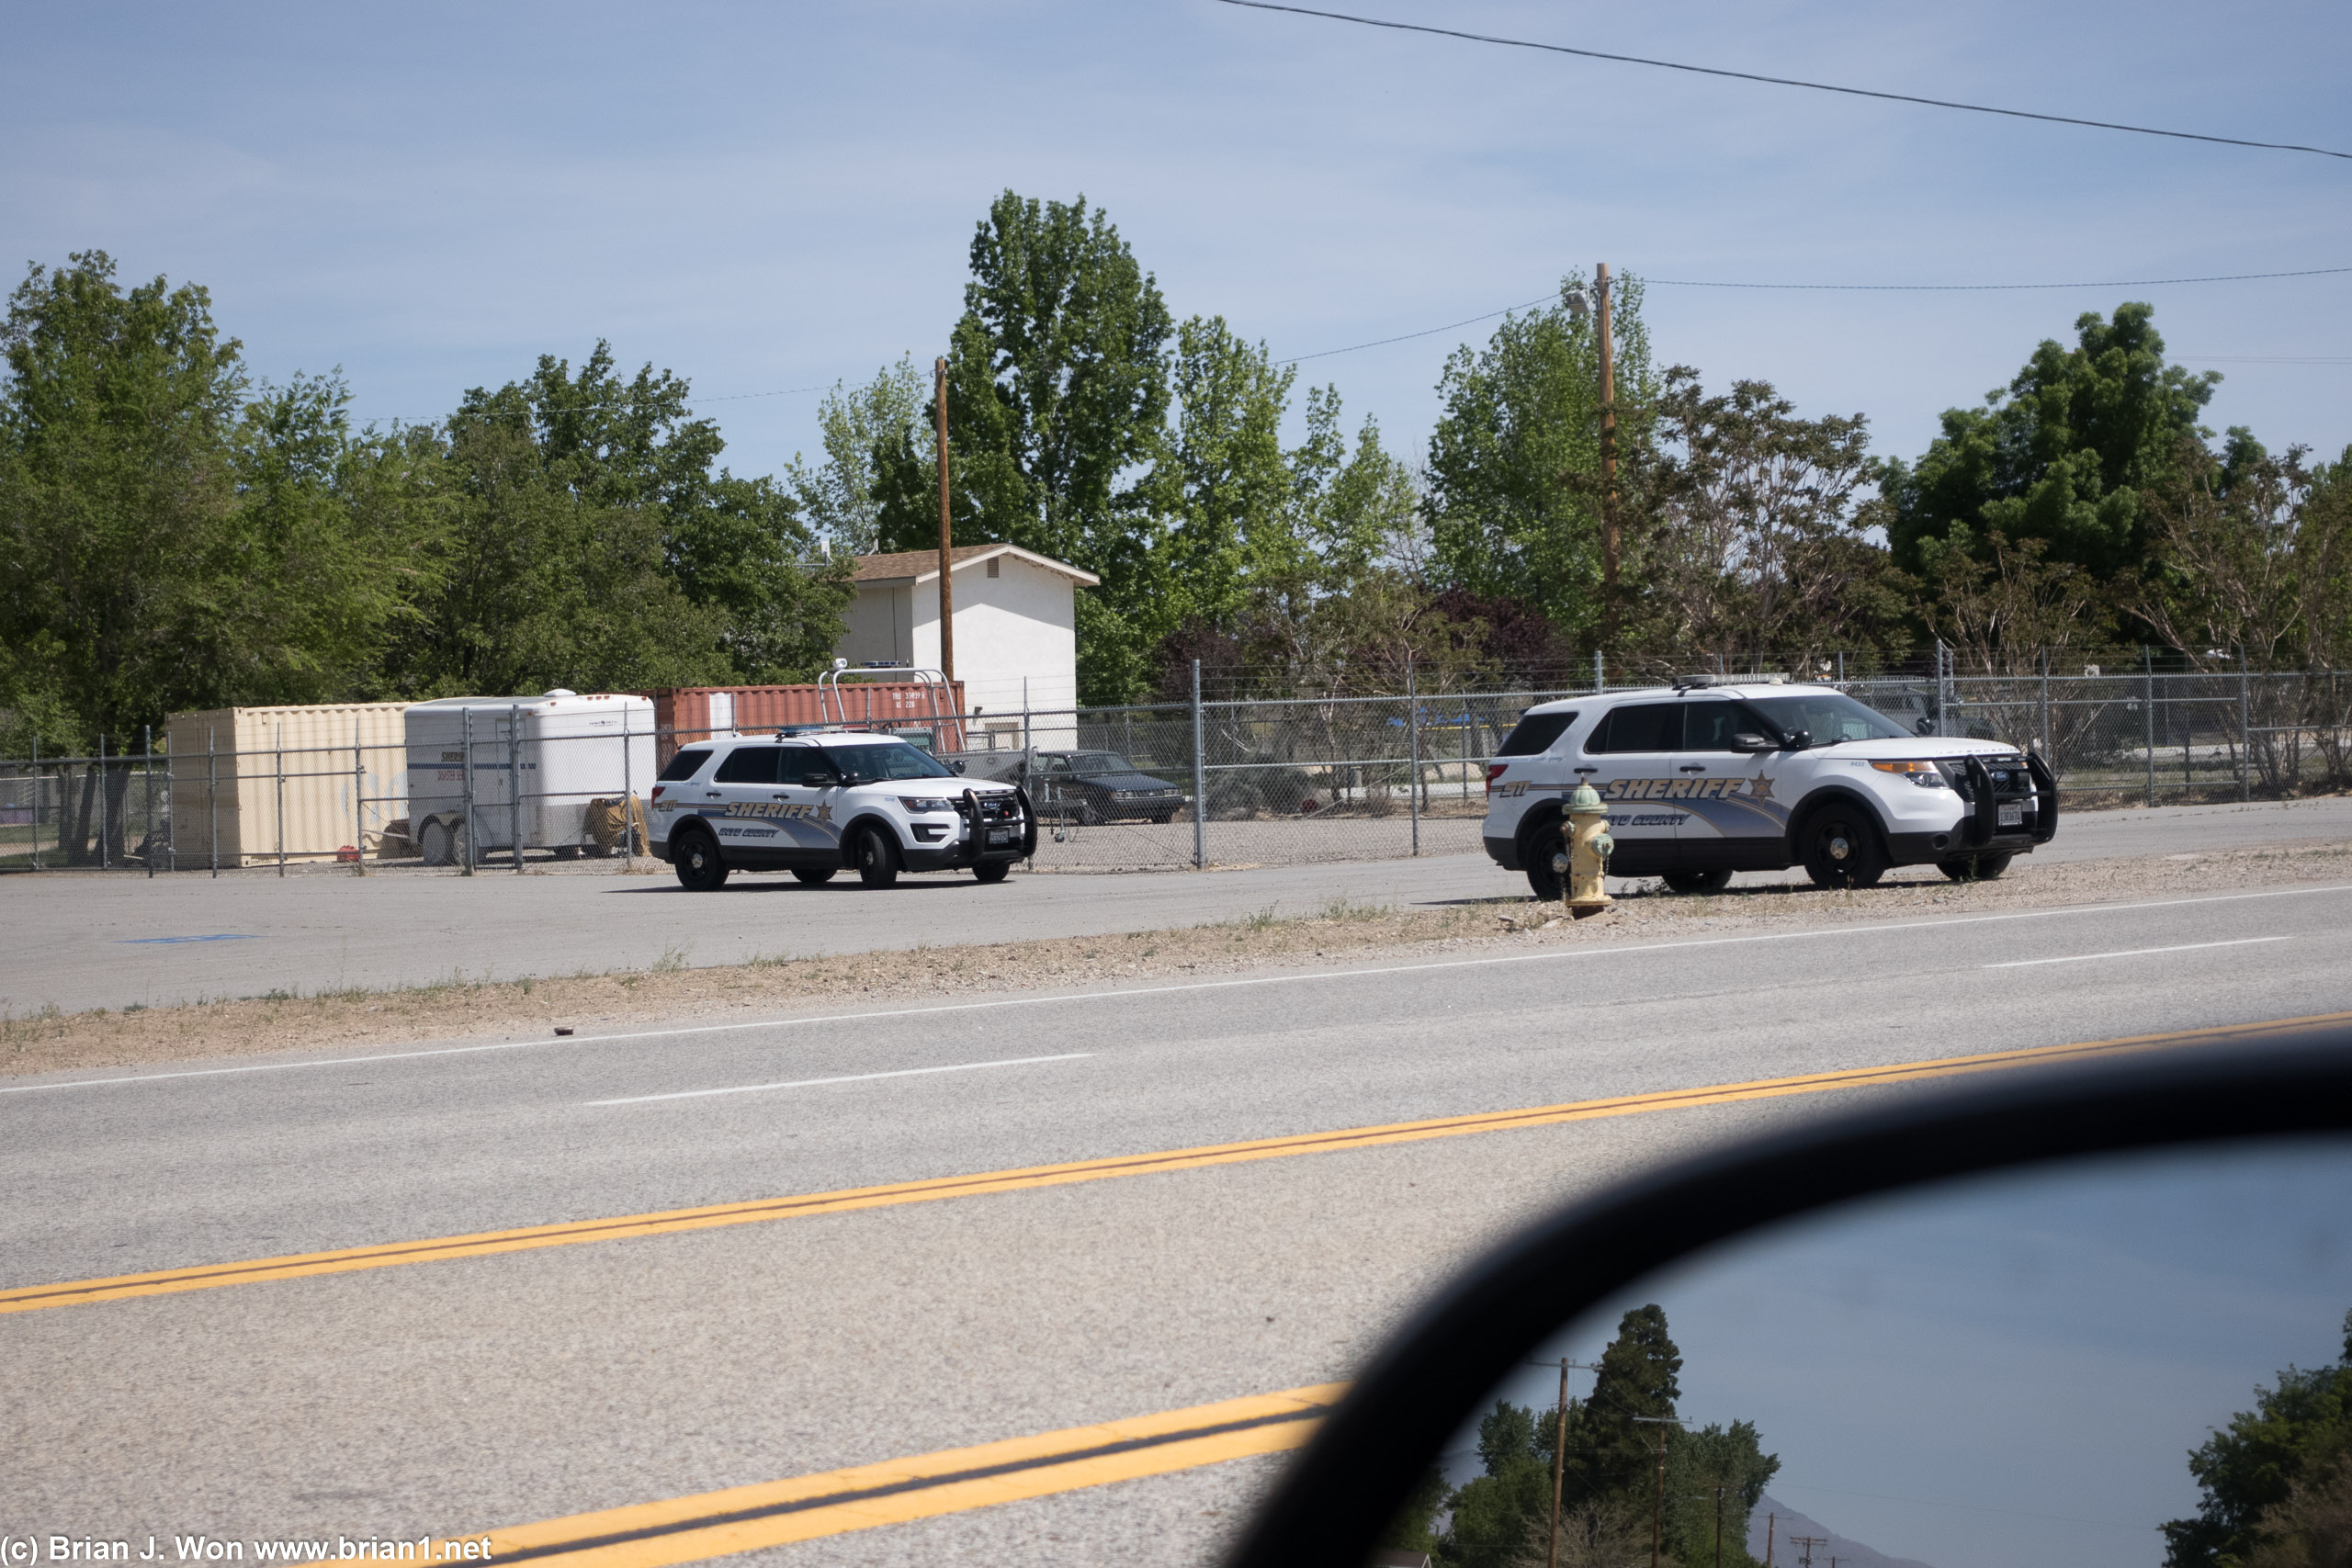 Empty Inyo County Sheriff's cars placed to deter speeders.